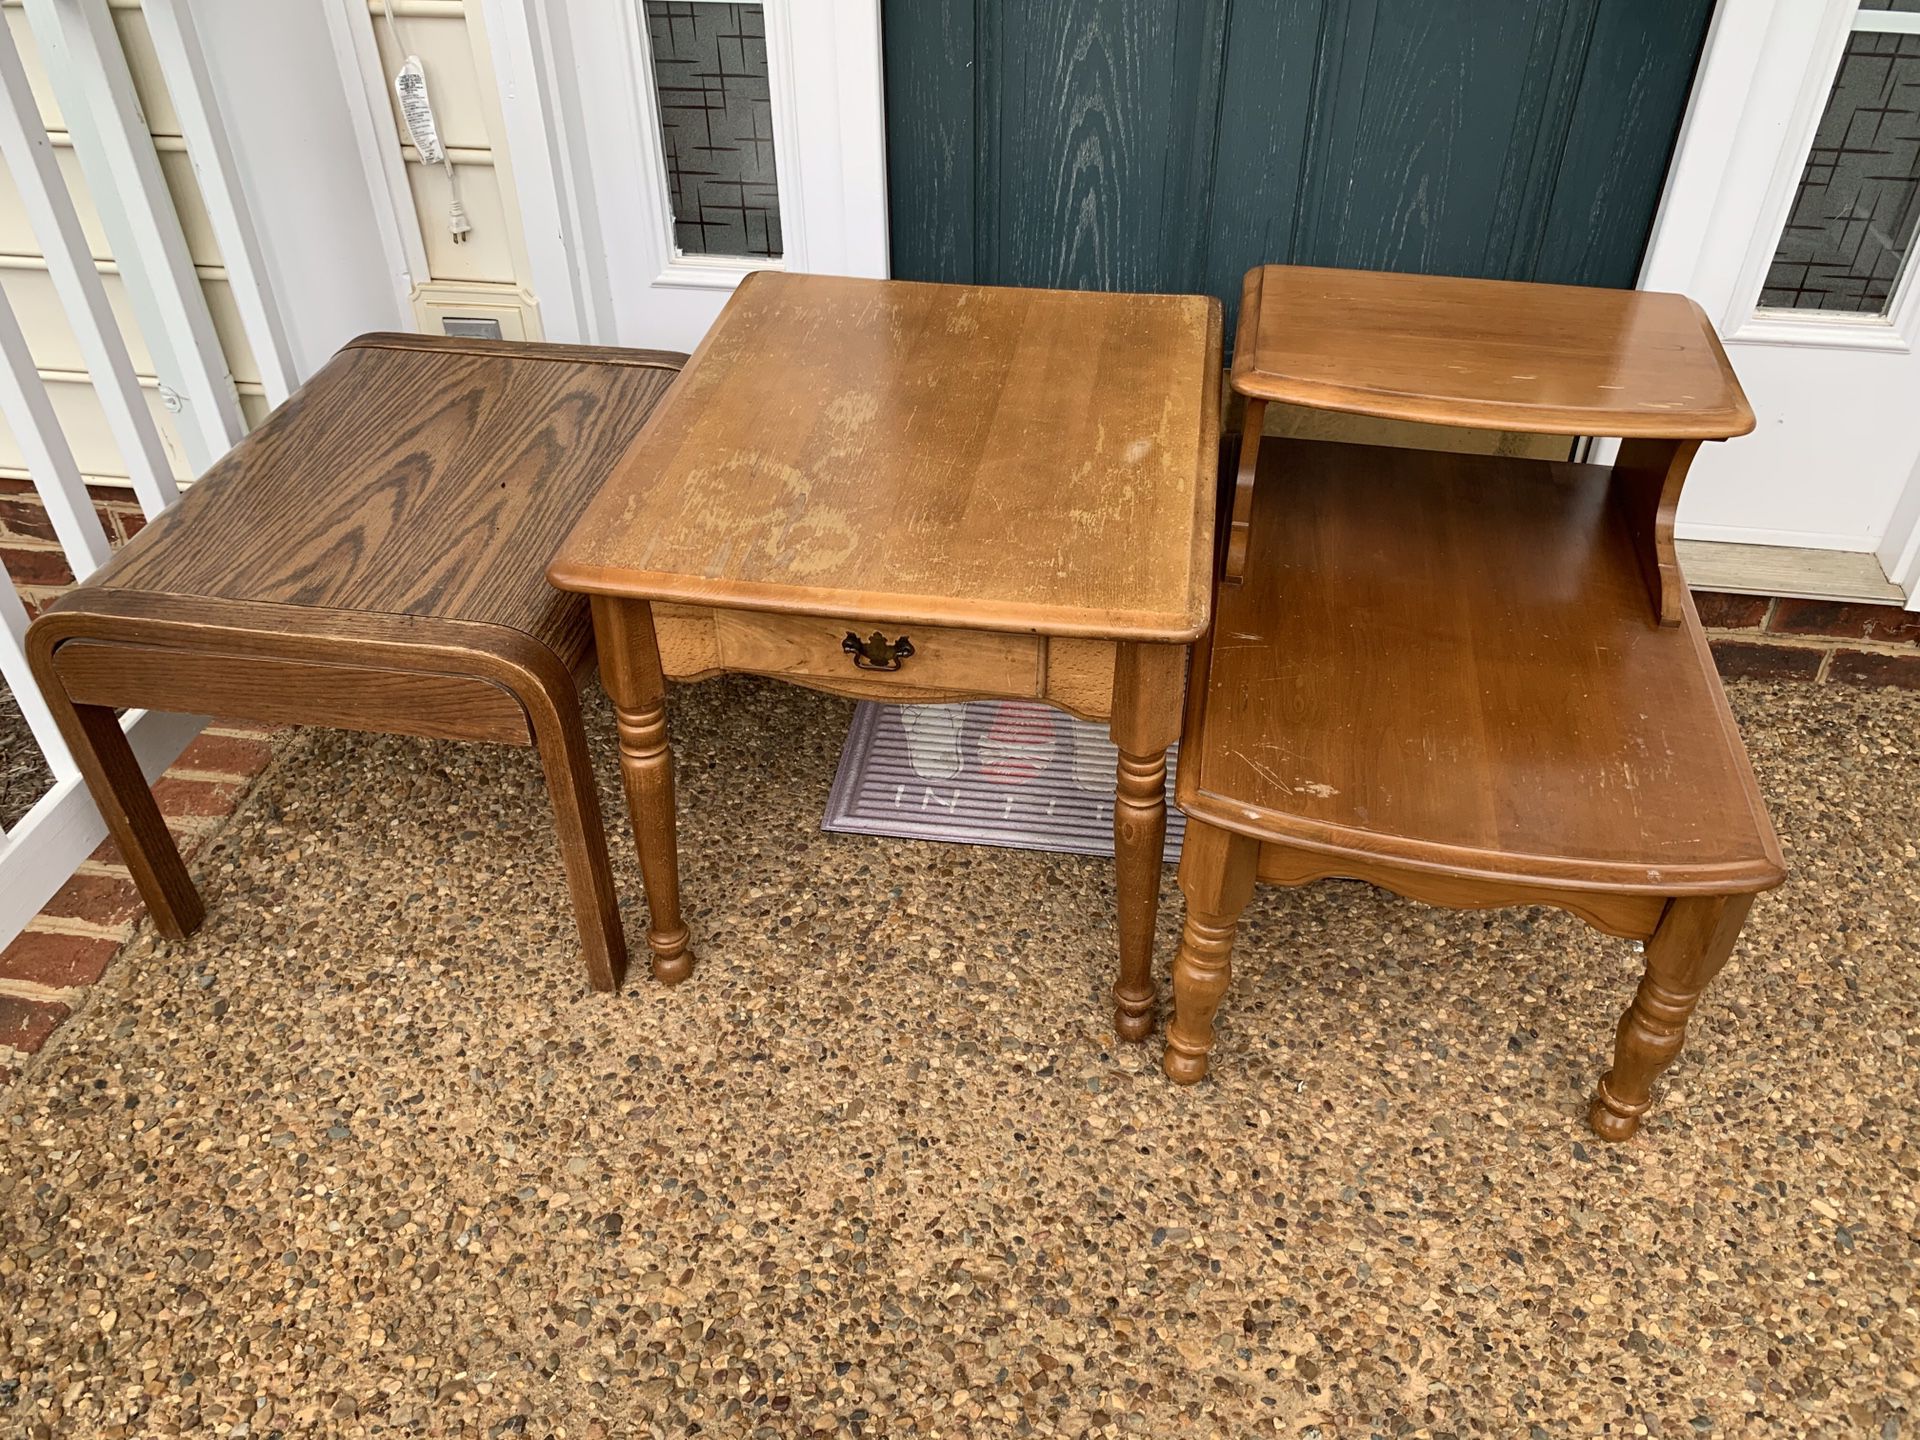 3 Tables For FREE ( Must be picked up before Monday 7/13 5 pm